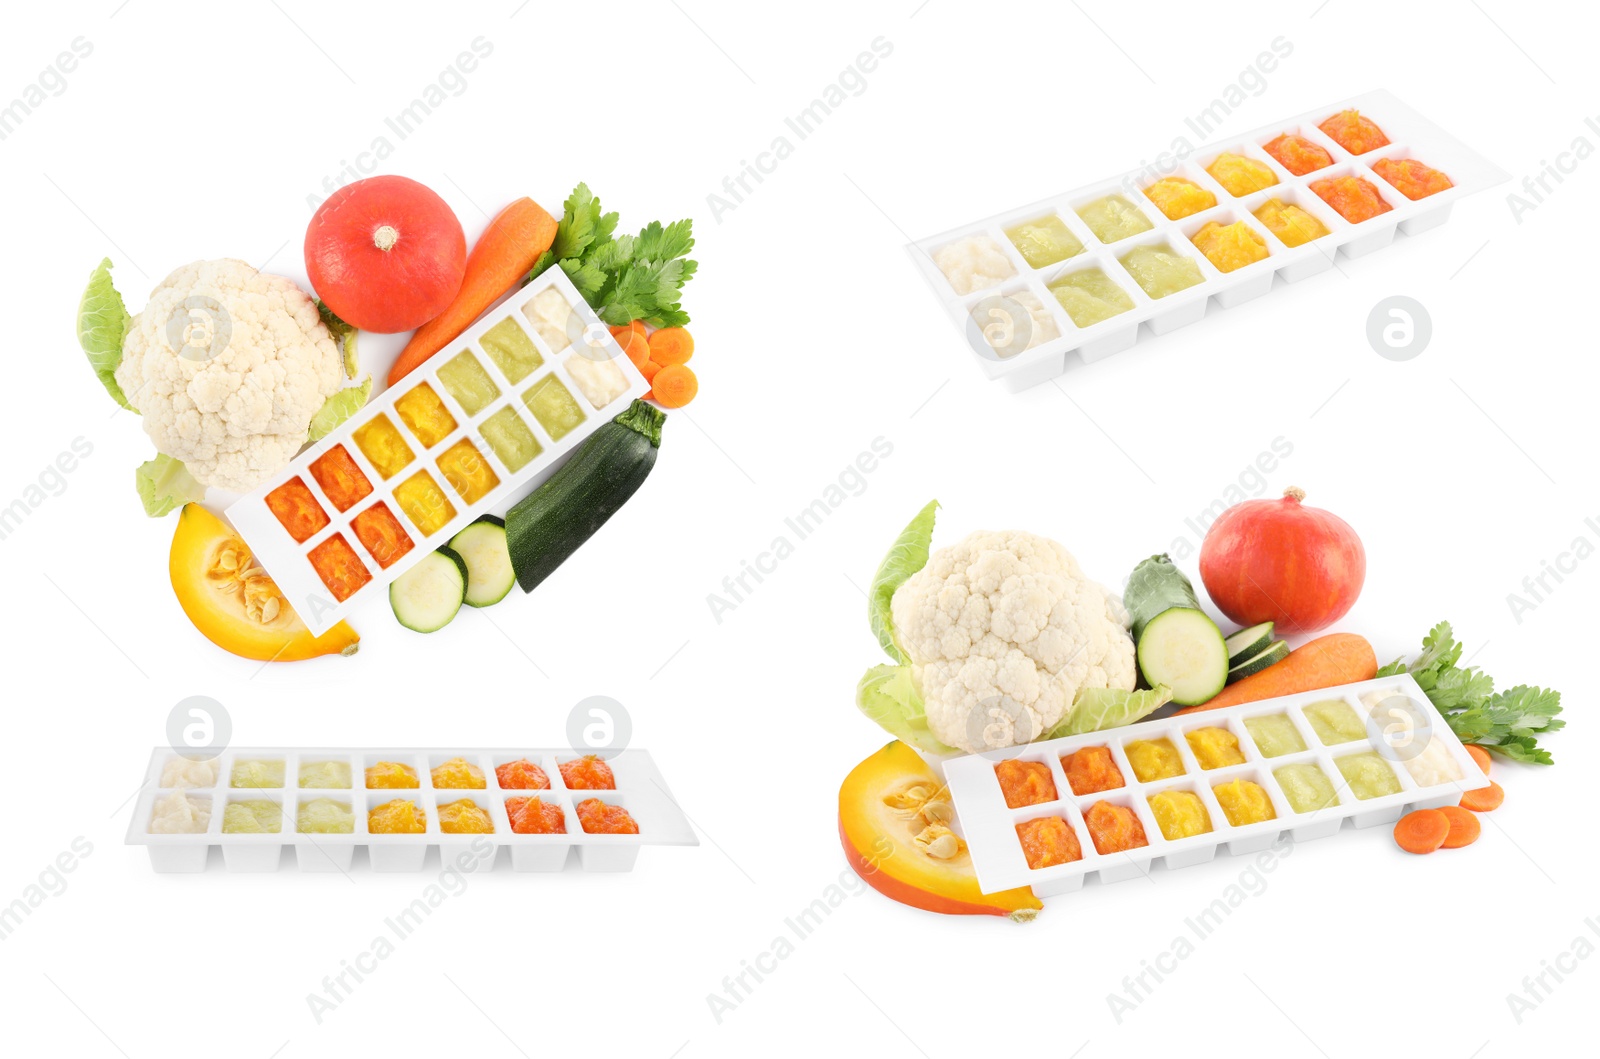 Image of Set with different frozen puree in ice cube trays and ingredients on white background